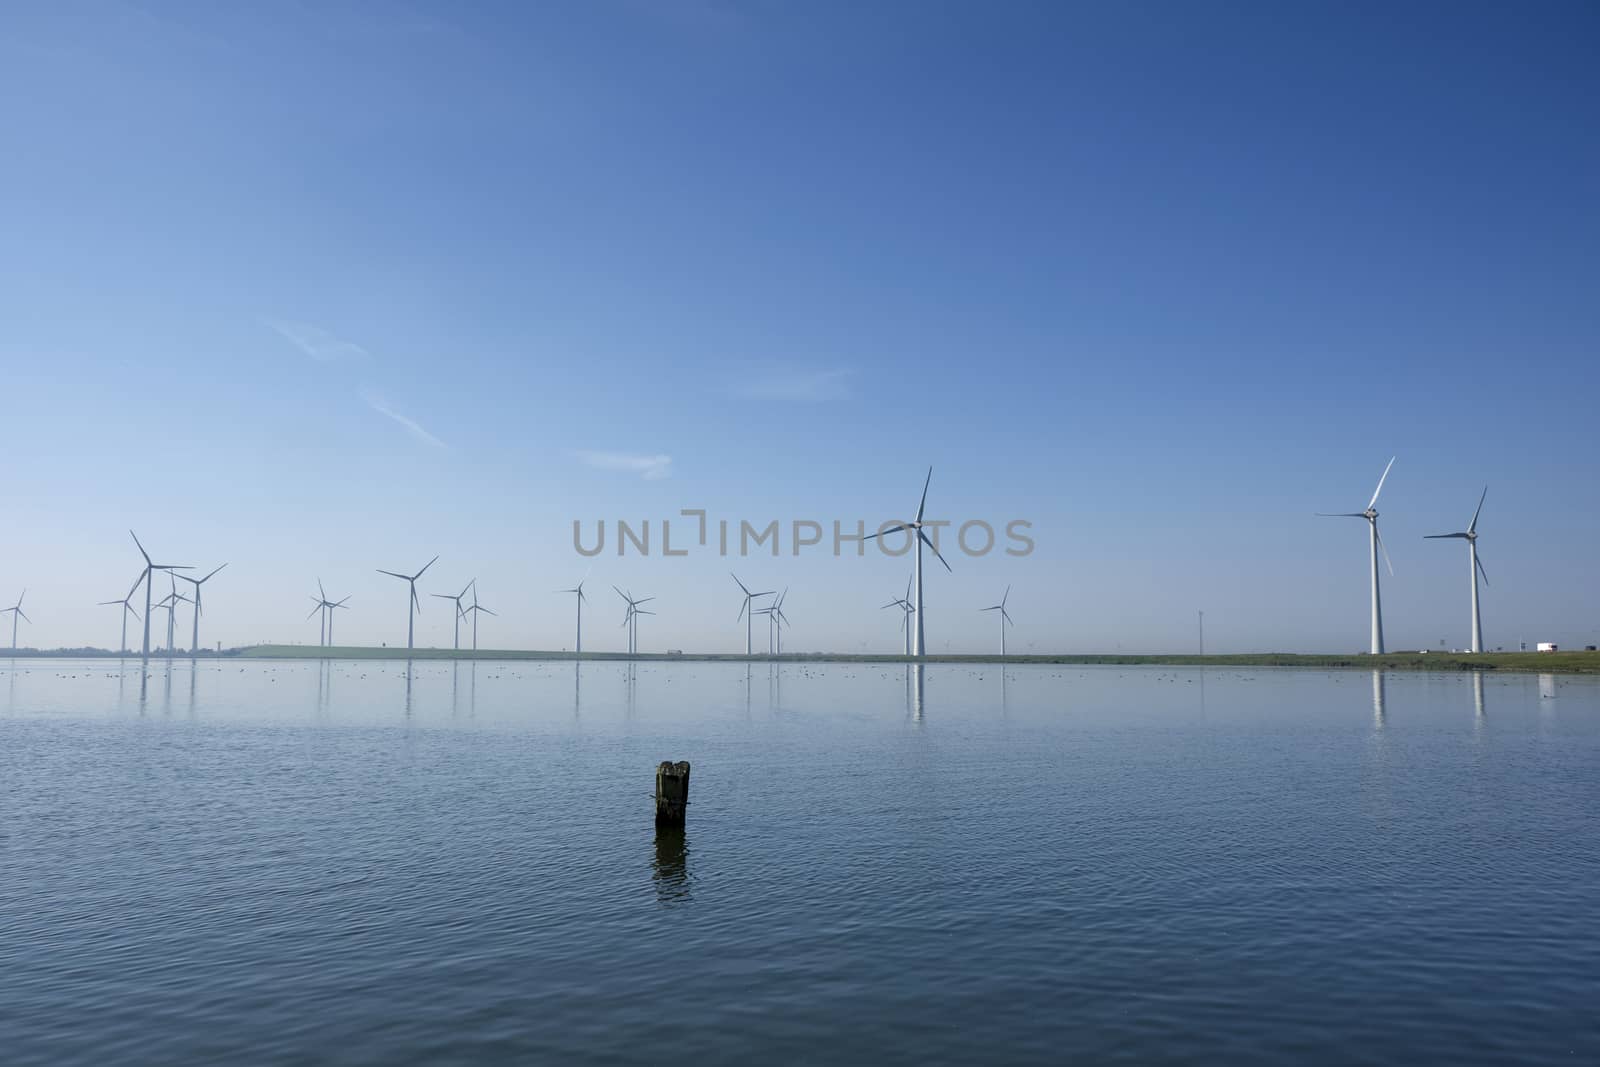 Modern windmills in the water near the shore along a green grassy dike in the netherlands